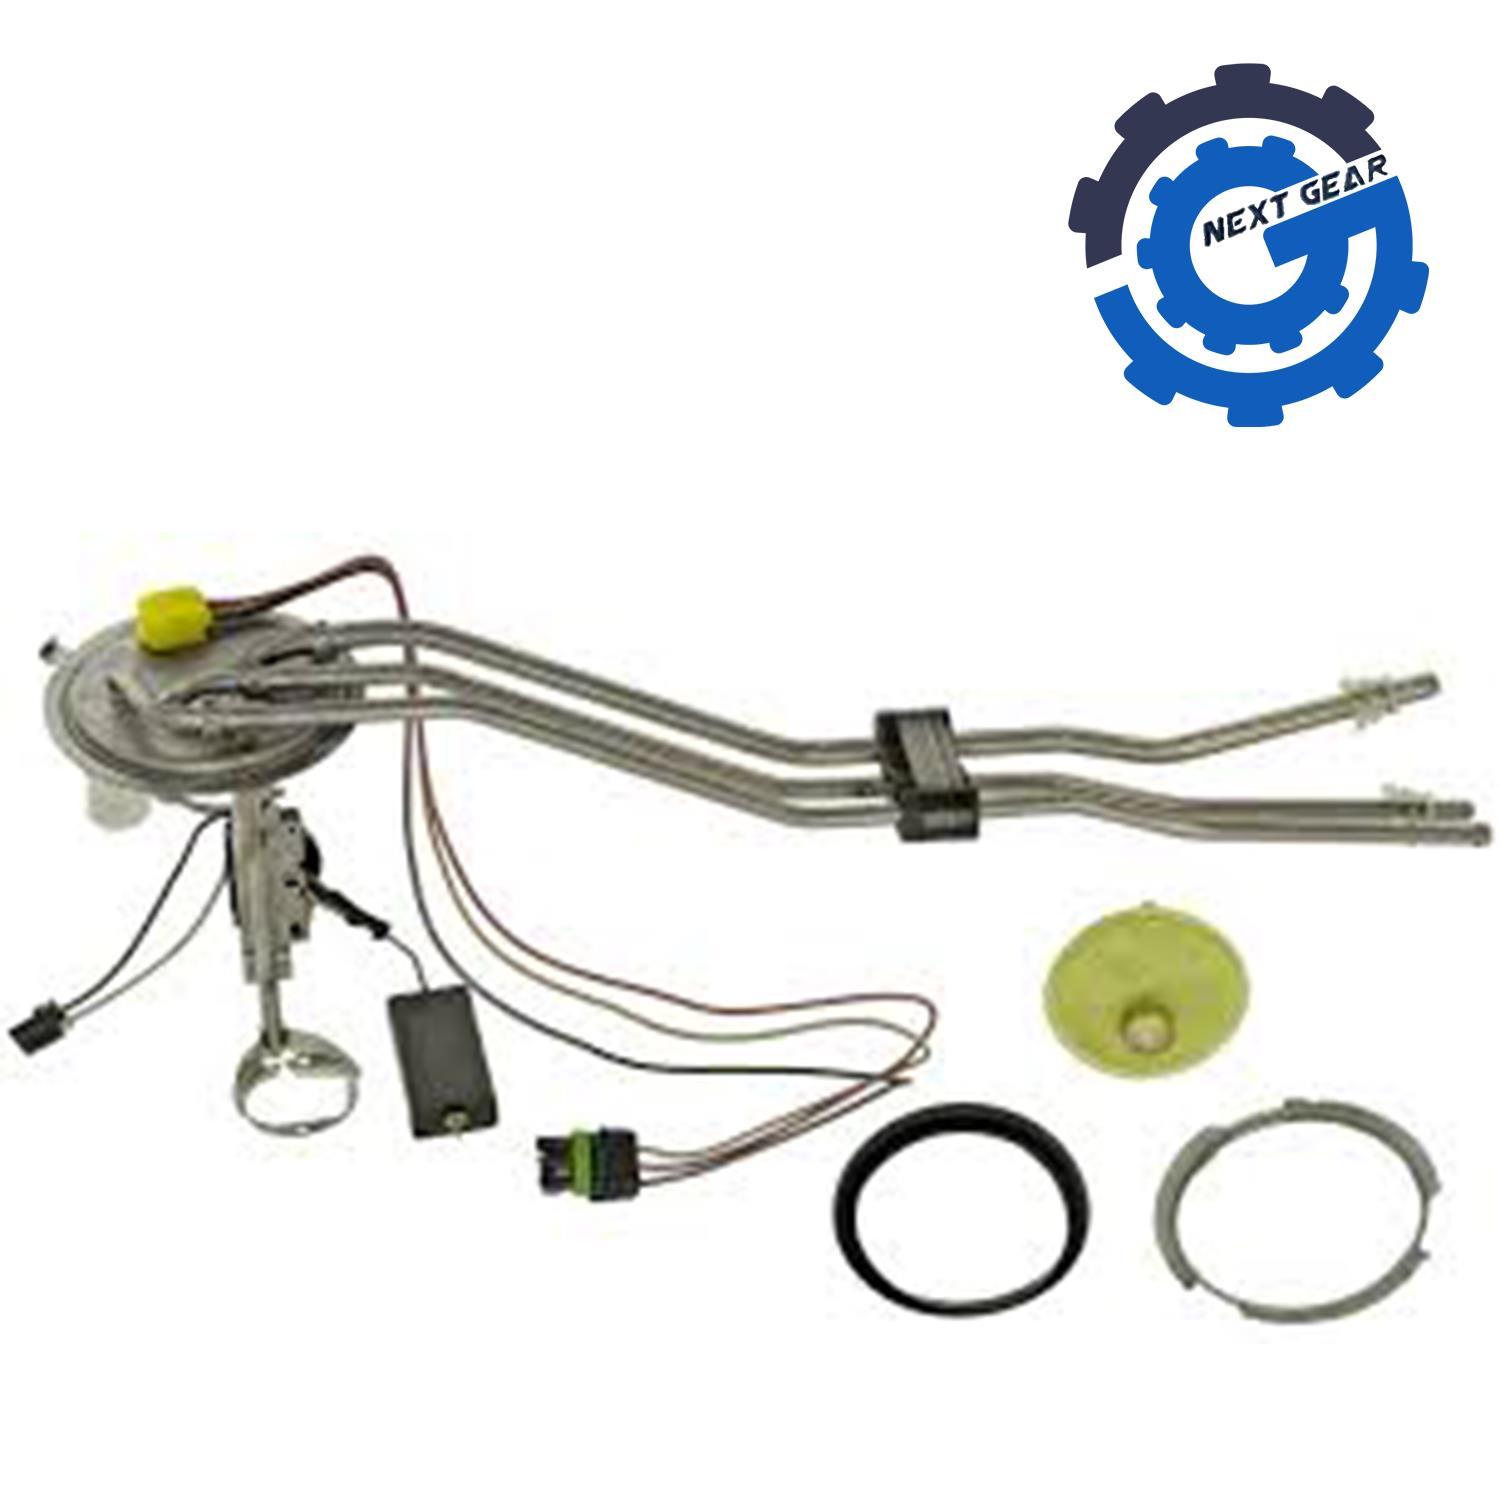 Primary image for New Fuel Take Sending Unit for 1990-1991 Chevy Corsica Beretta 25028712